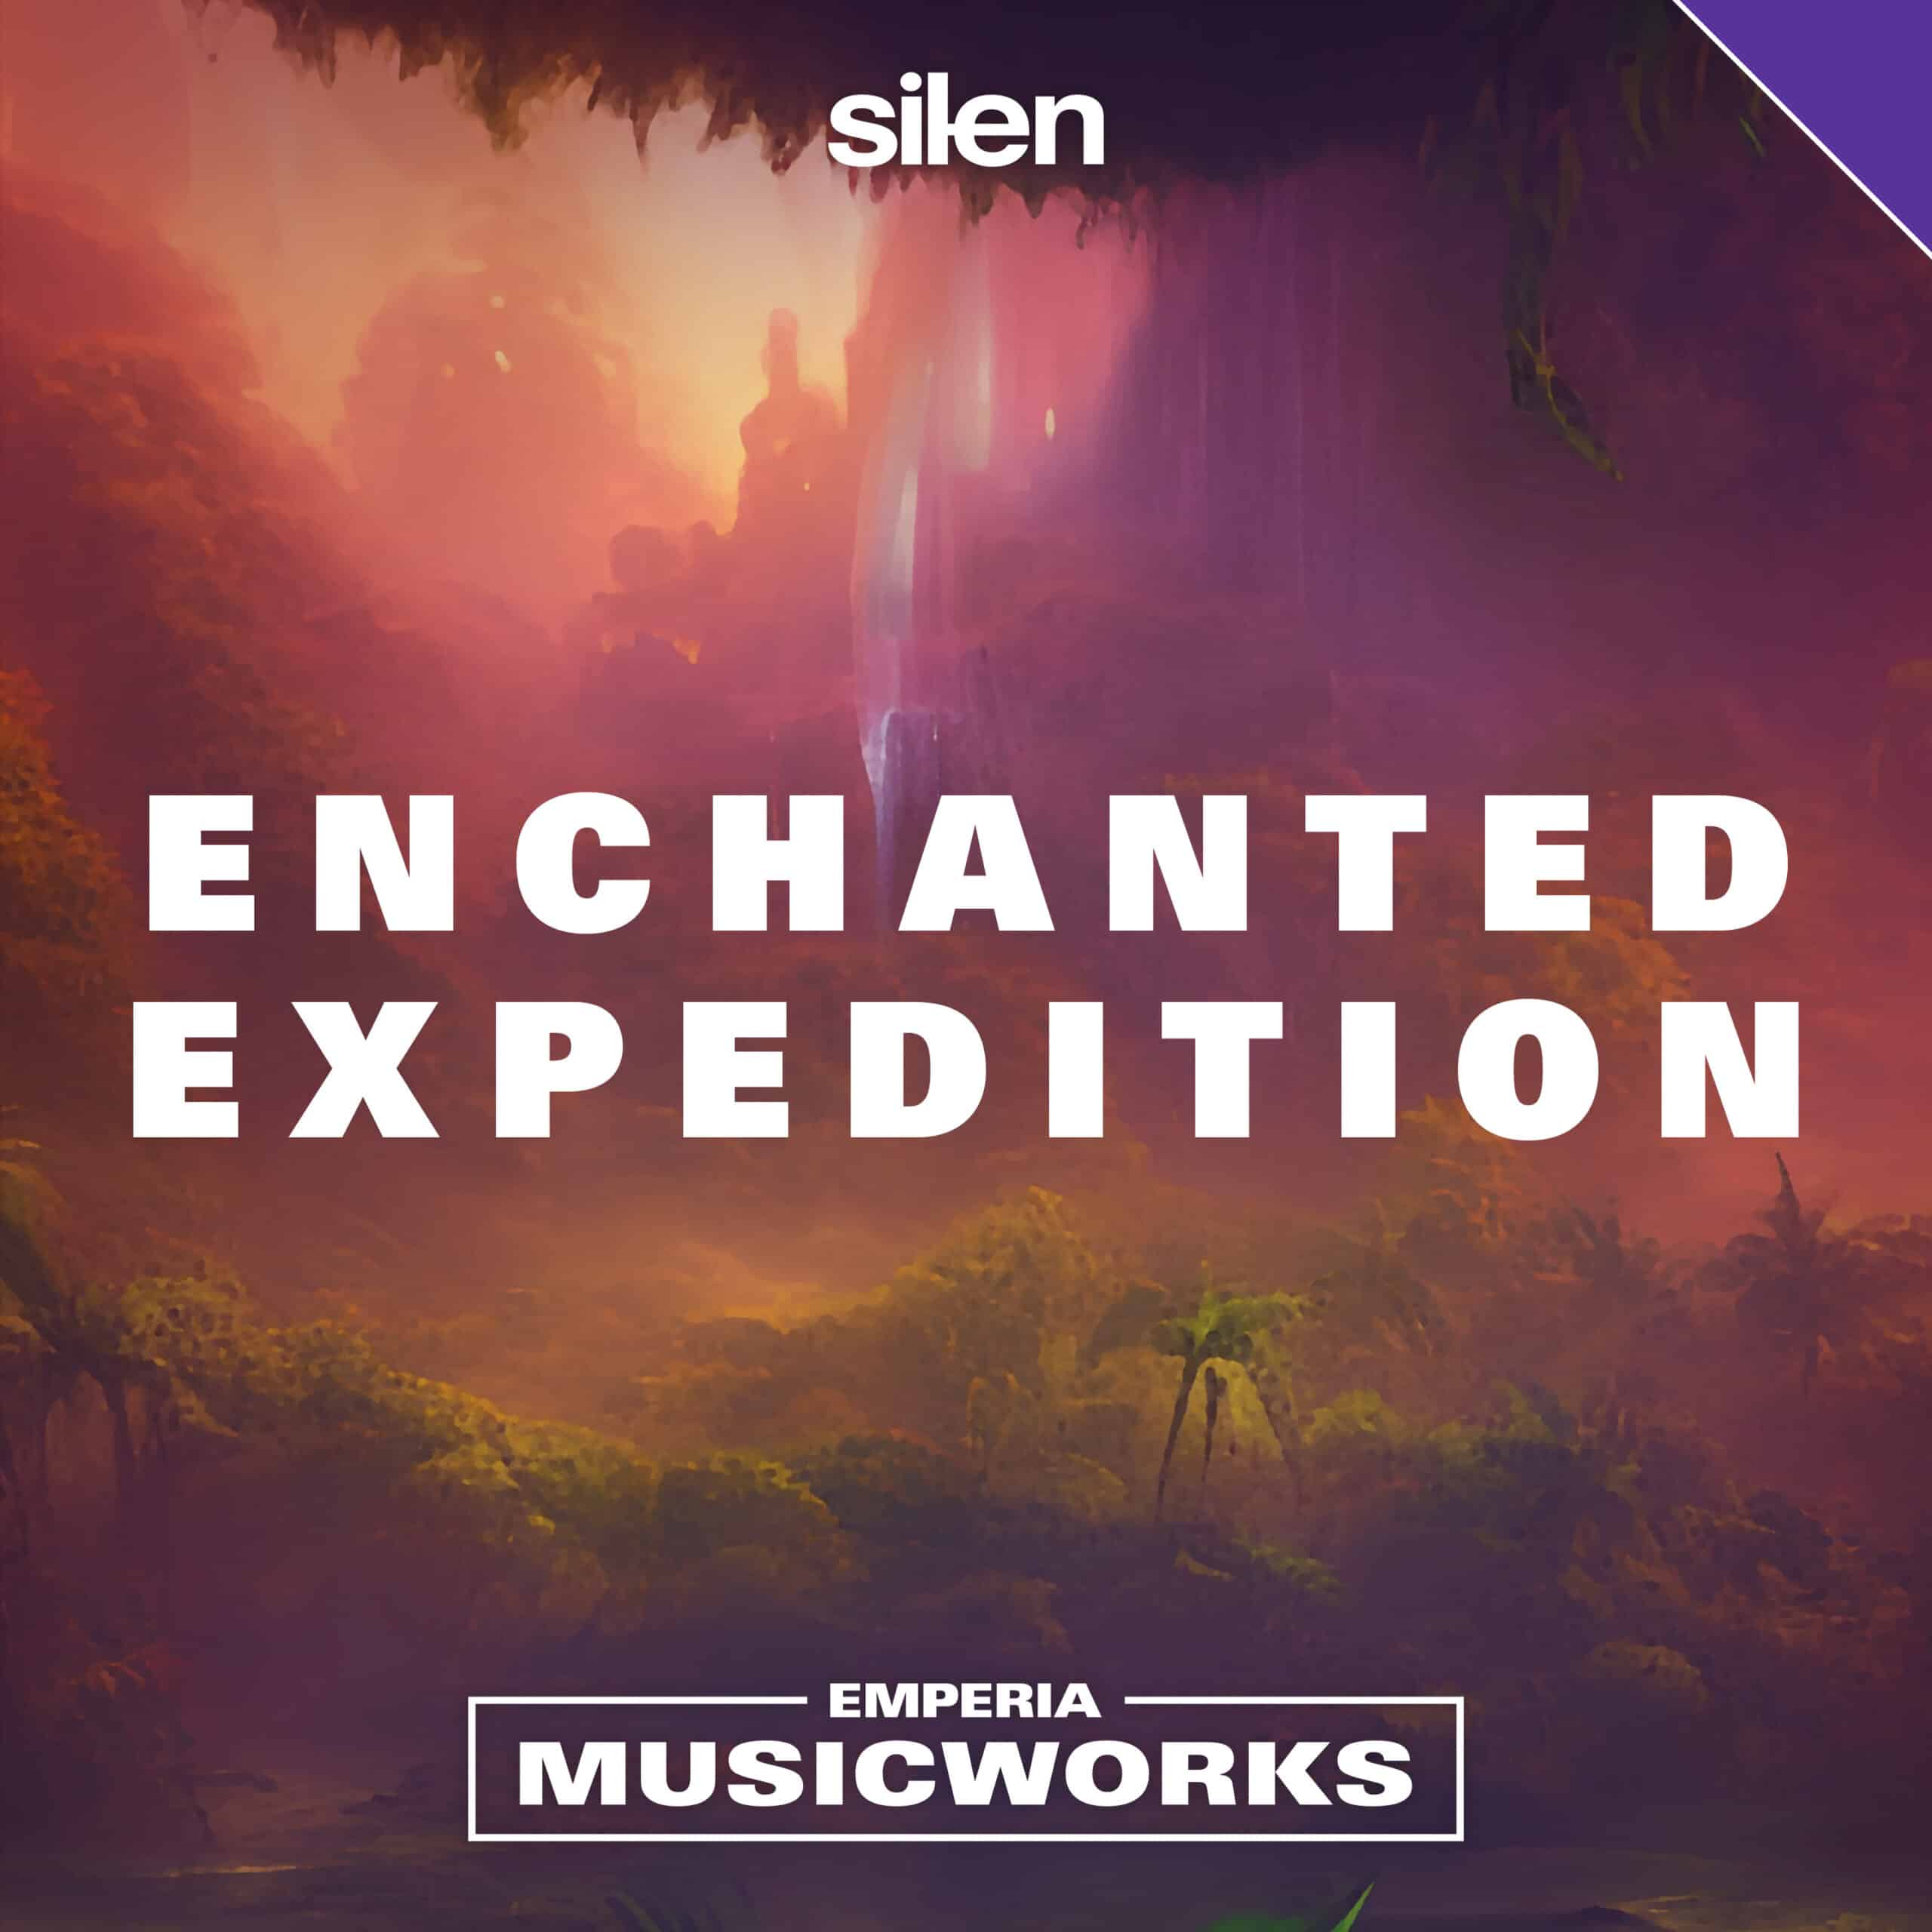 Enchanted Expedition Fantastical journey to imaginary worlds. Orchestral storytelling brings out the magic with rich strings and wondrous melodies